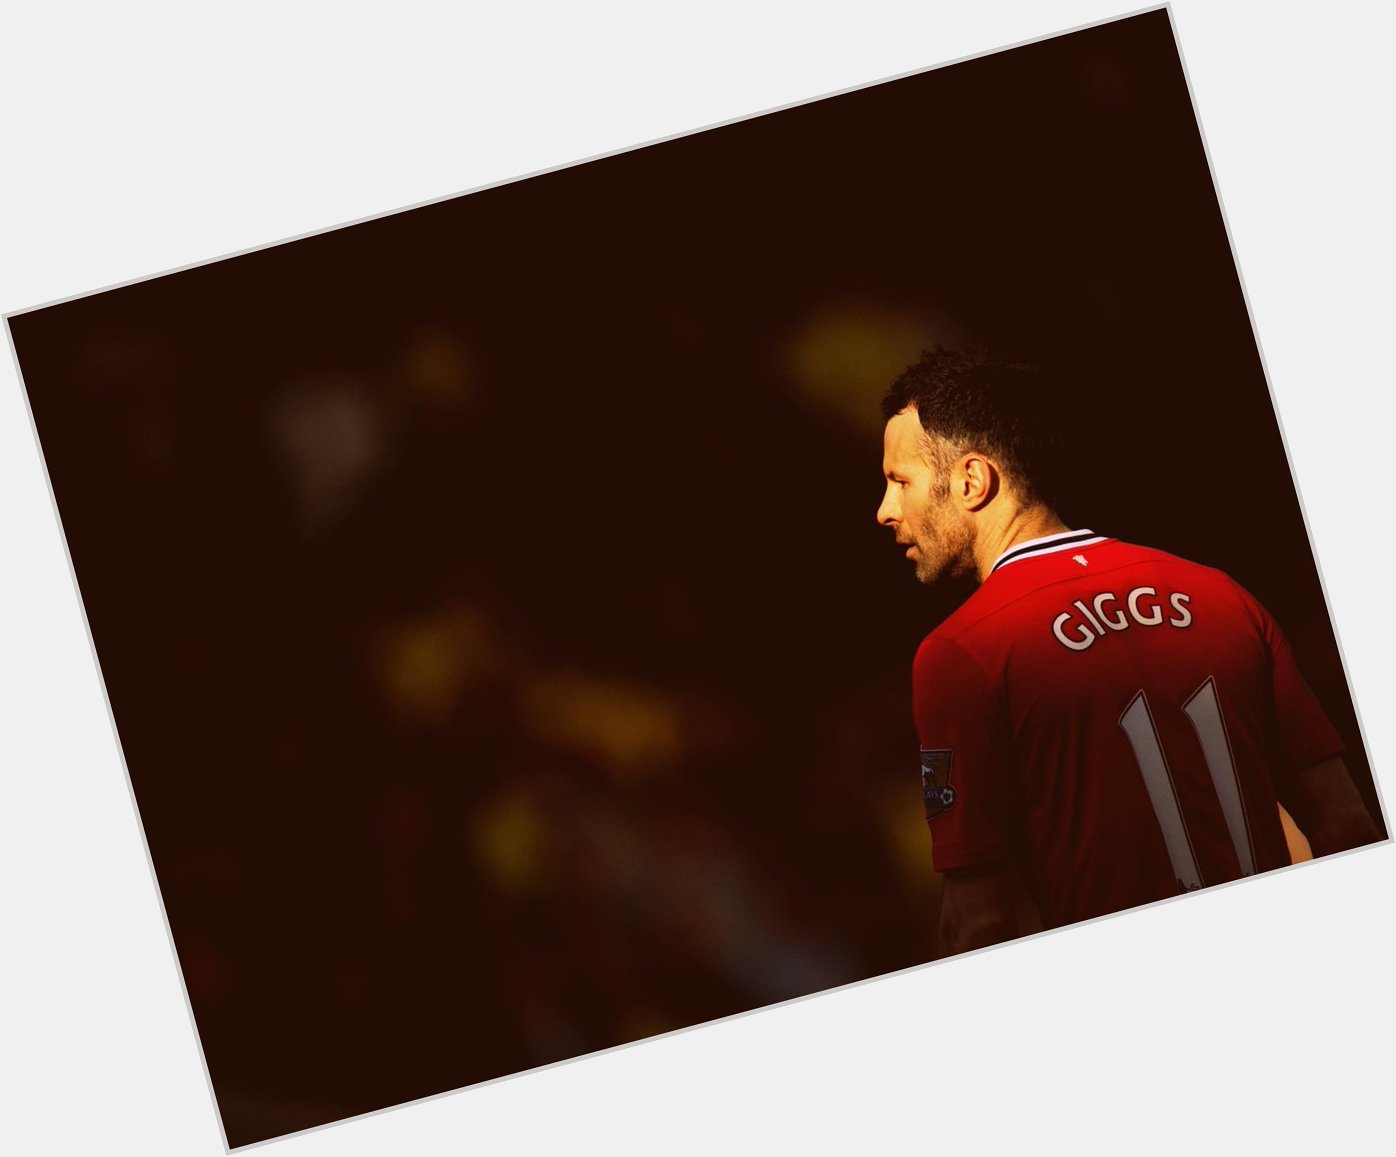 I have only one word for him, a true LEGEND. 
Happy 41st birthday to the Son of Man United, RYAN GIGGS. 